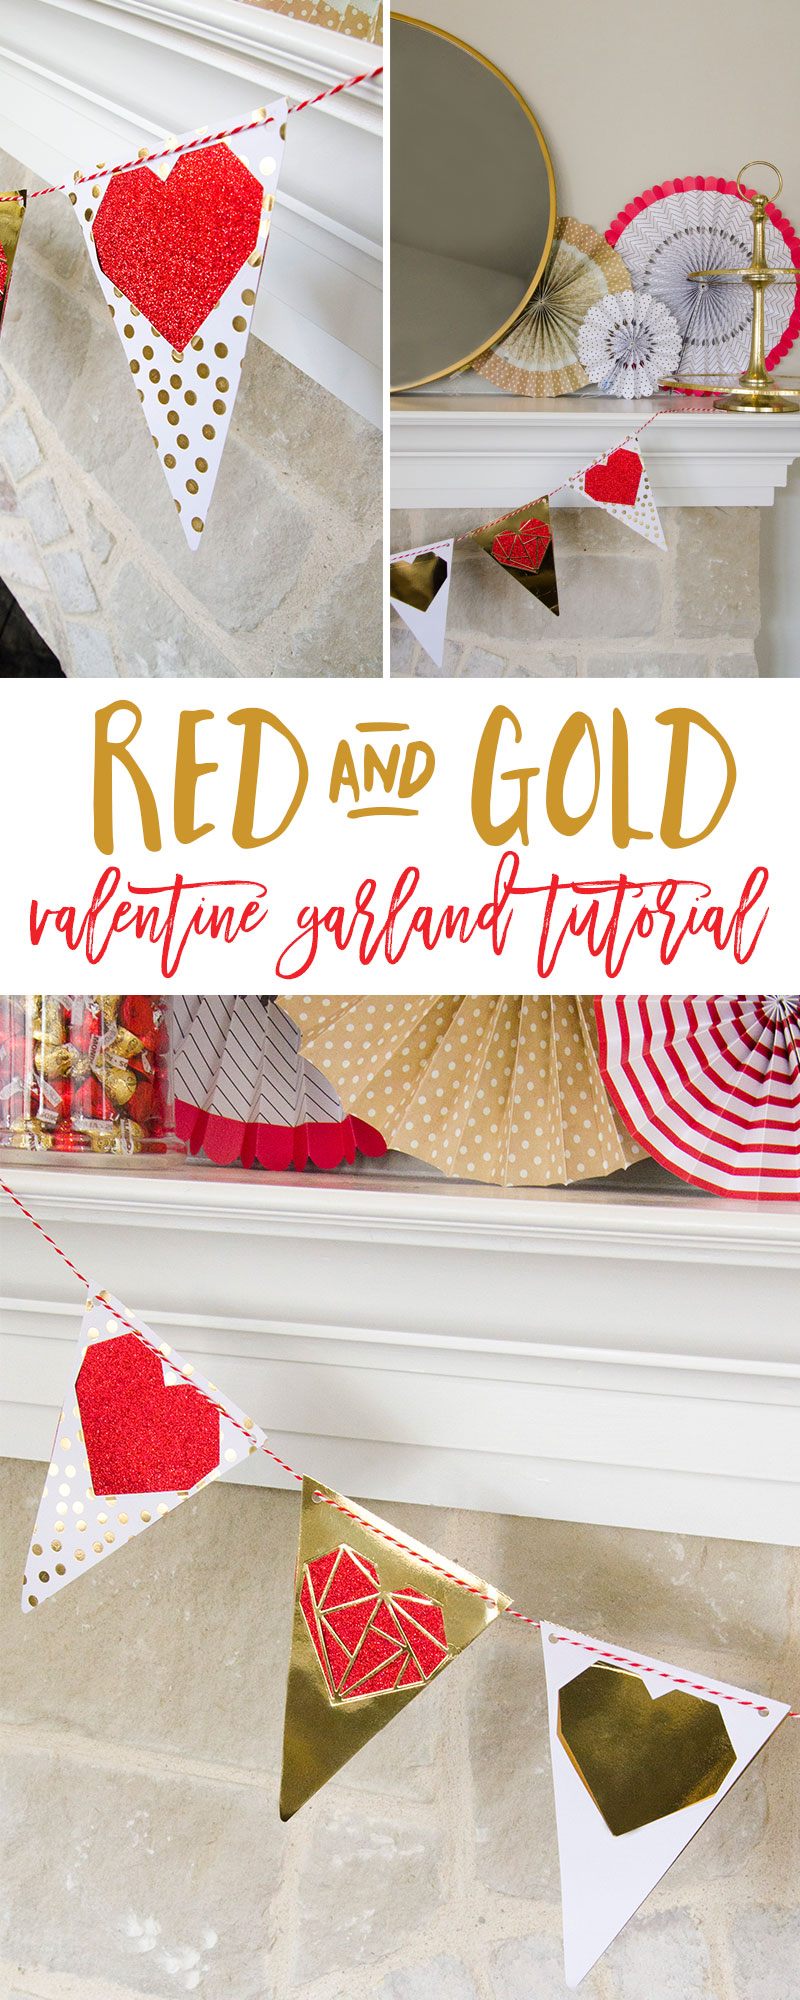 DIY Valentine's Day Decorations & Mantel Tutorial by Lindi Haws of Love The Day